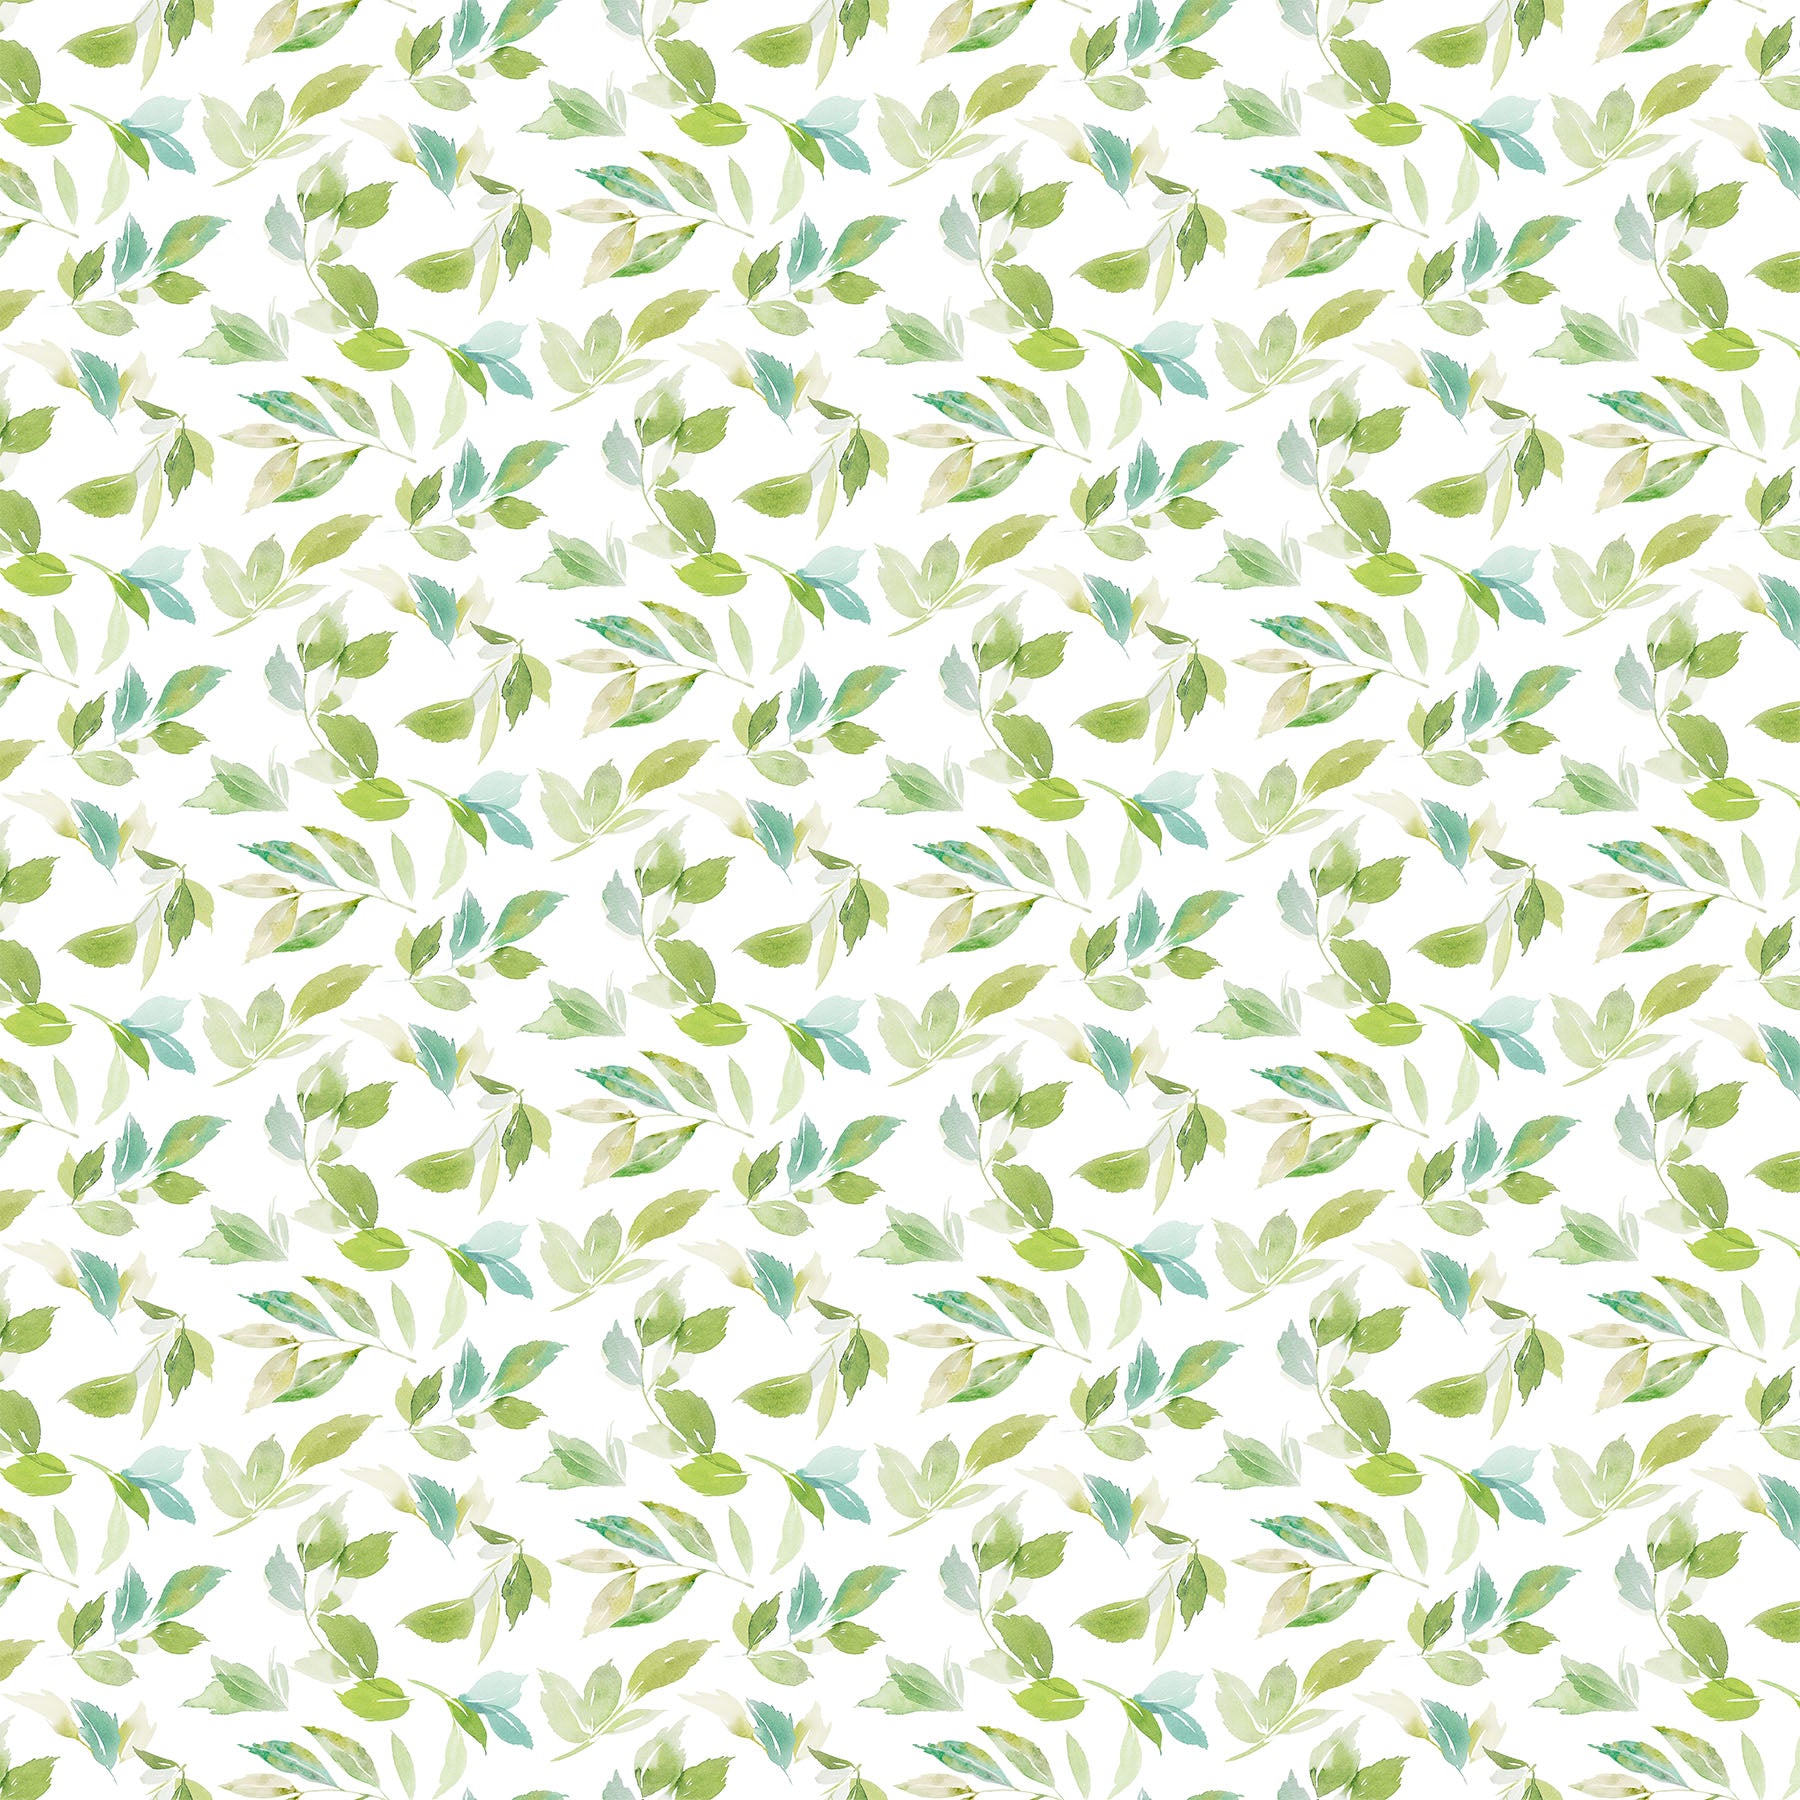 Sweet Surrender Quilt Fabric - Leaf Toss in White/Green - 26951-10